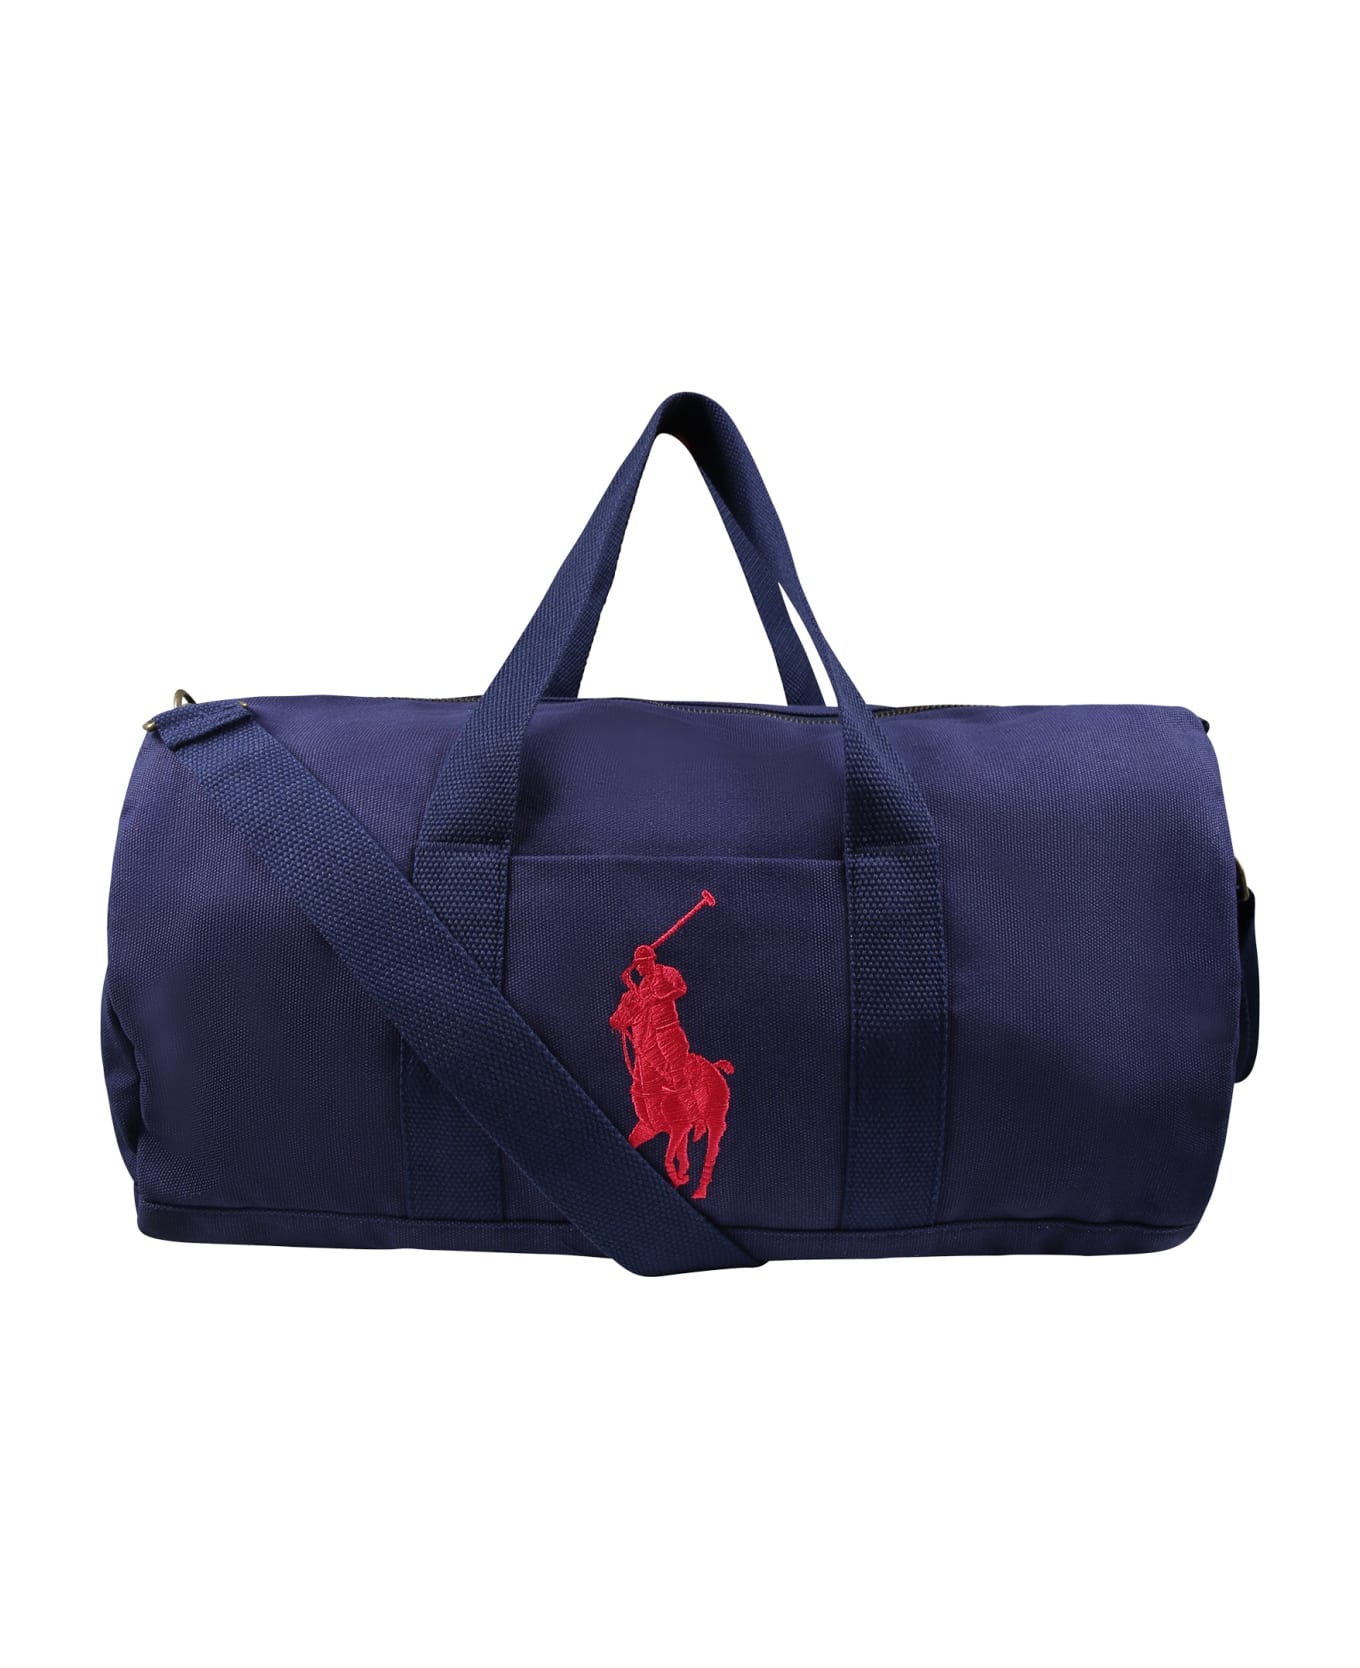 Ralph Lauren Blue Suitcase For Kids With Logo - Blue アクセサリー＆ギフト